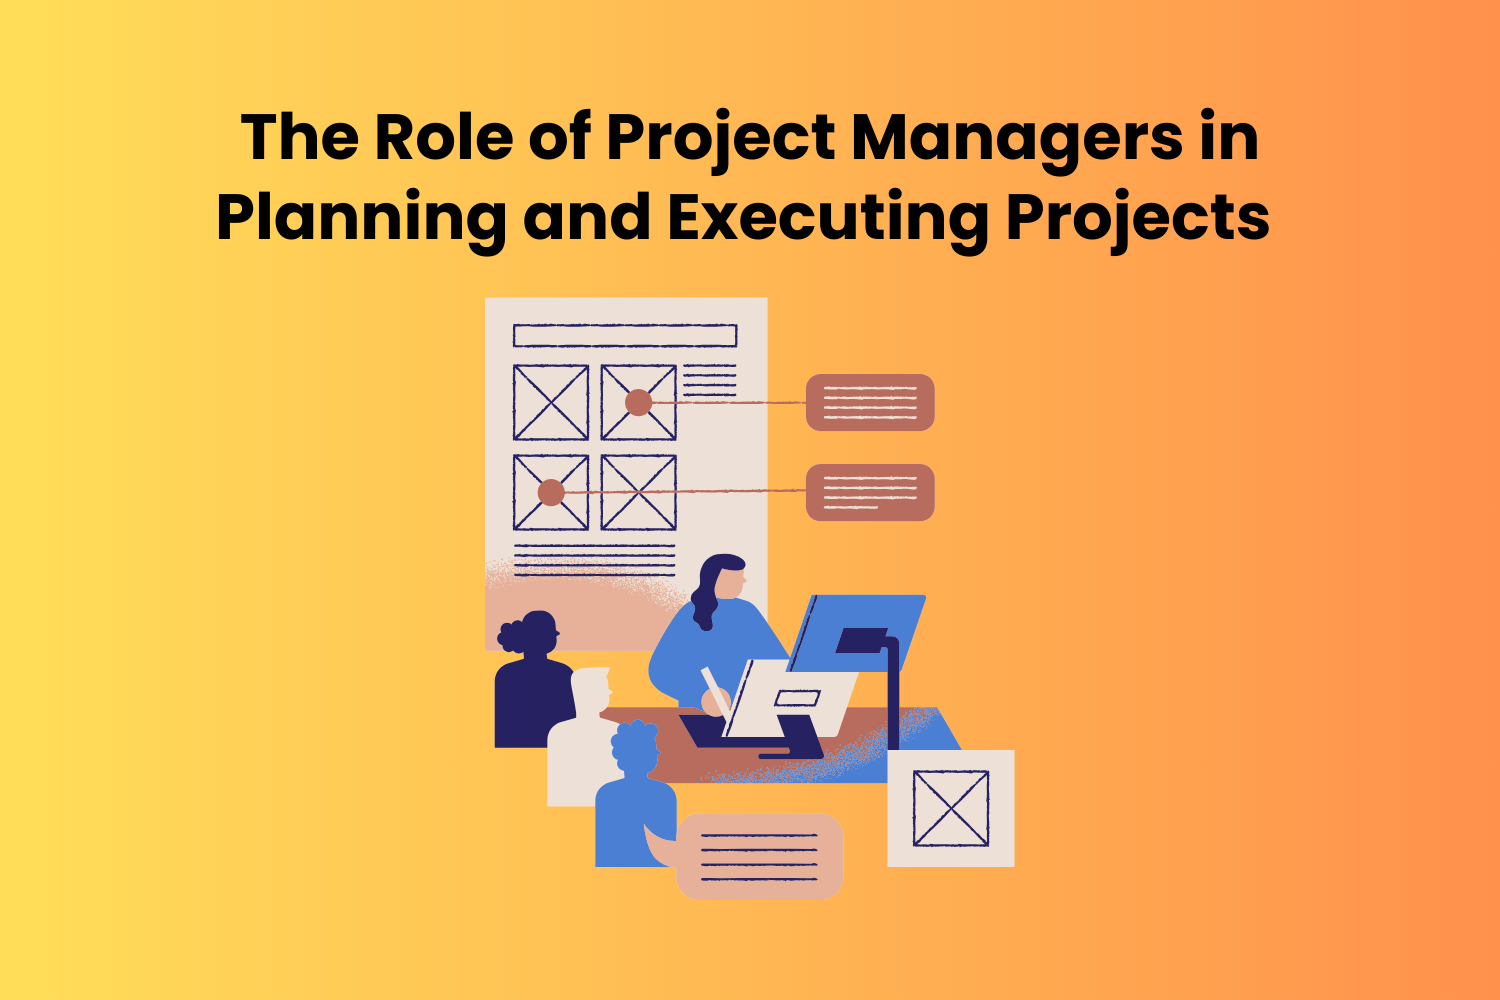 The Role of Project Managers in Planning and Executing Projects